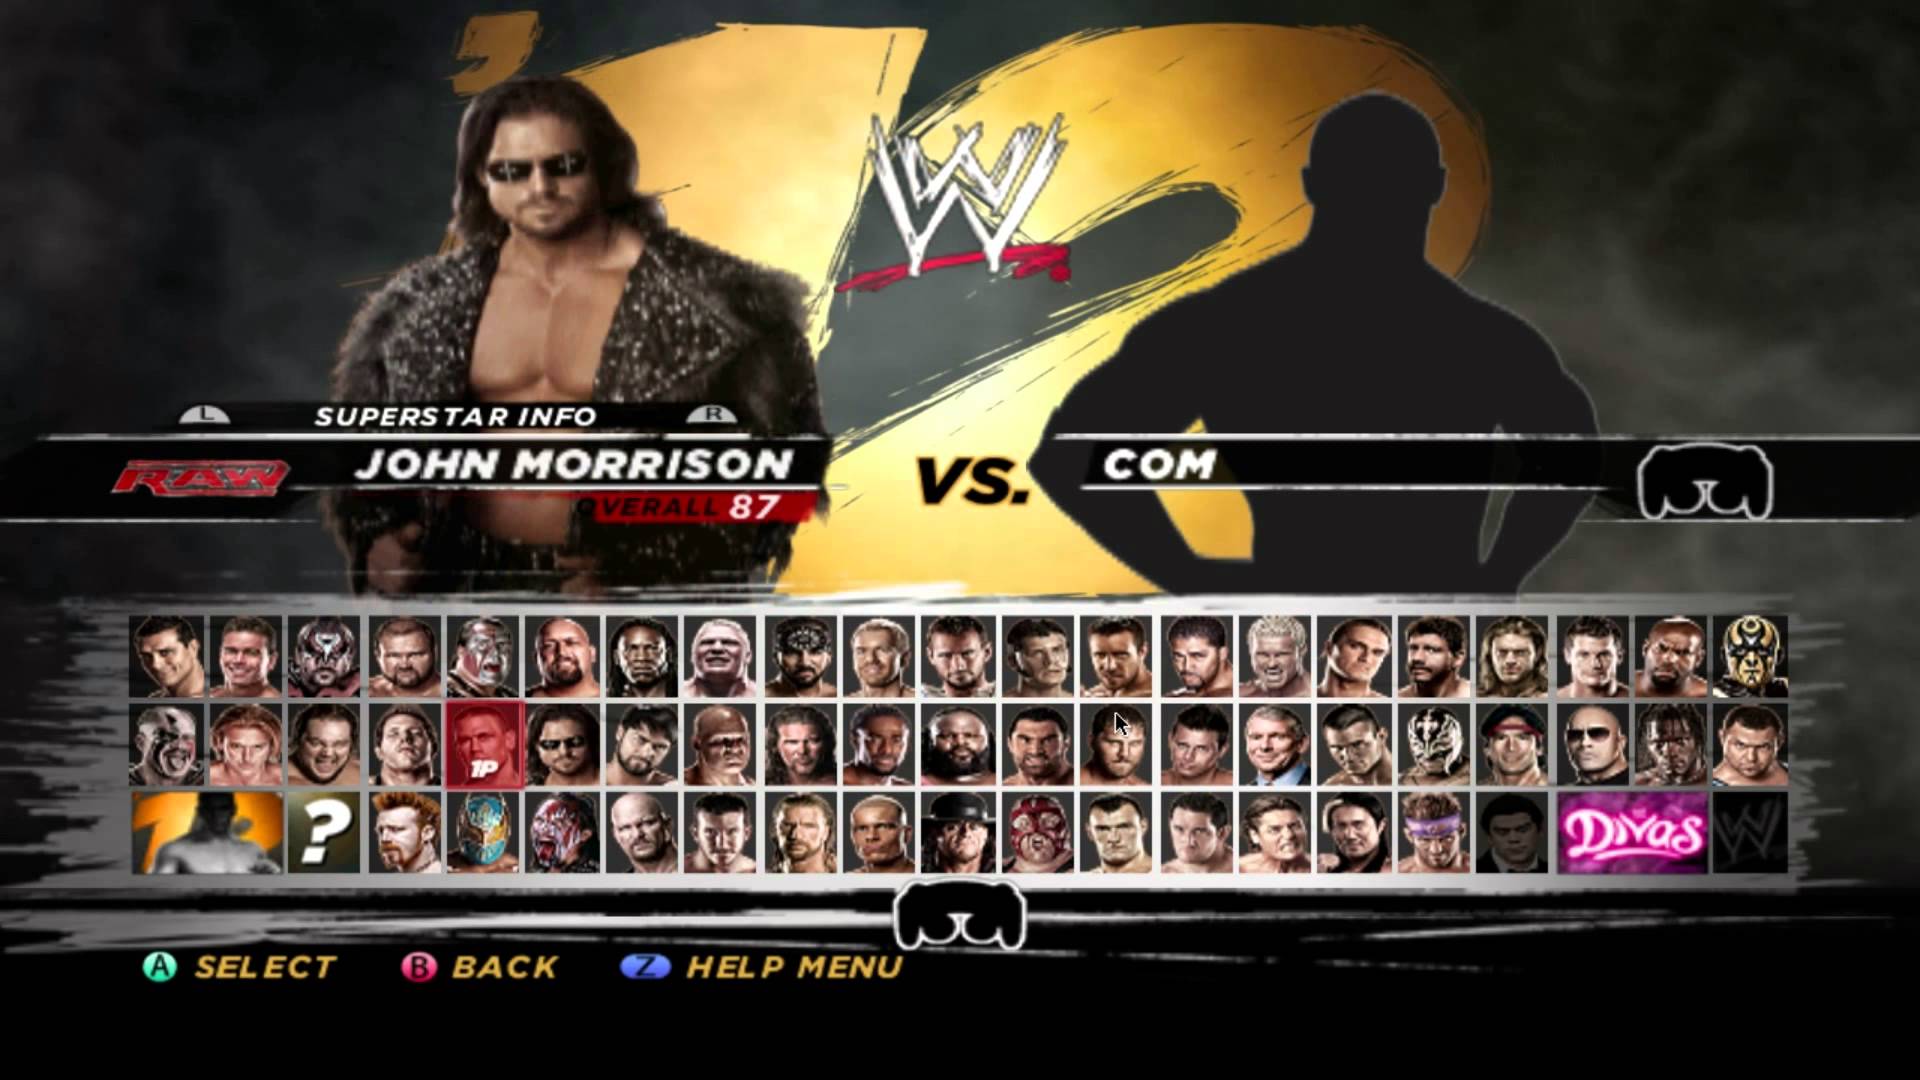 Nice Images Collection: WWE '12 Desktop Wallpapers